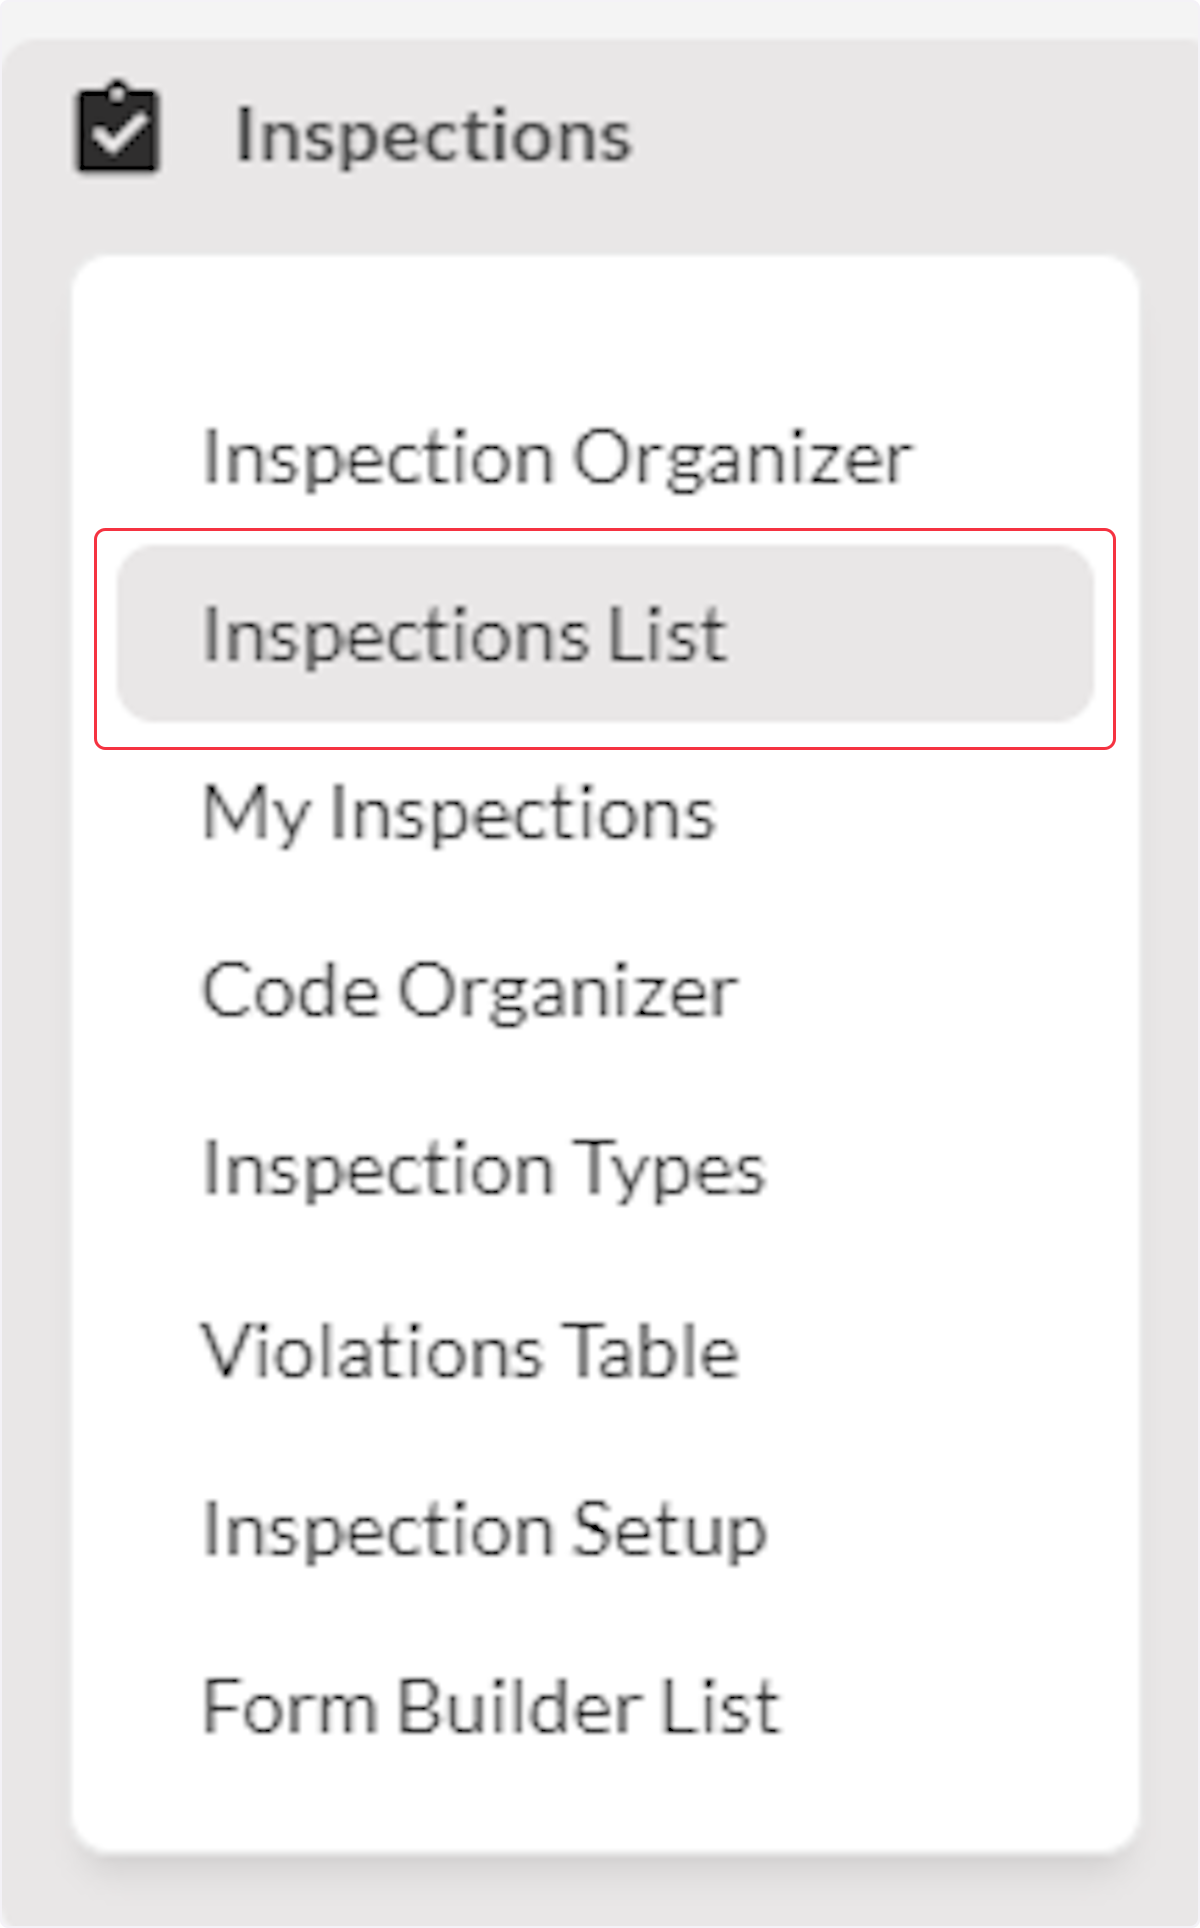 Click on Inspections List.